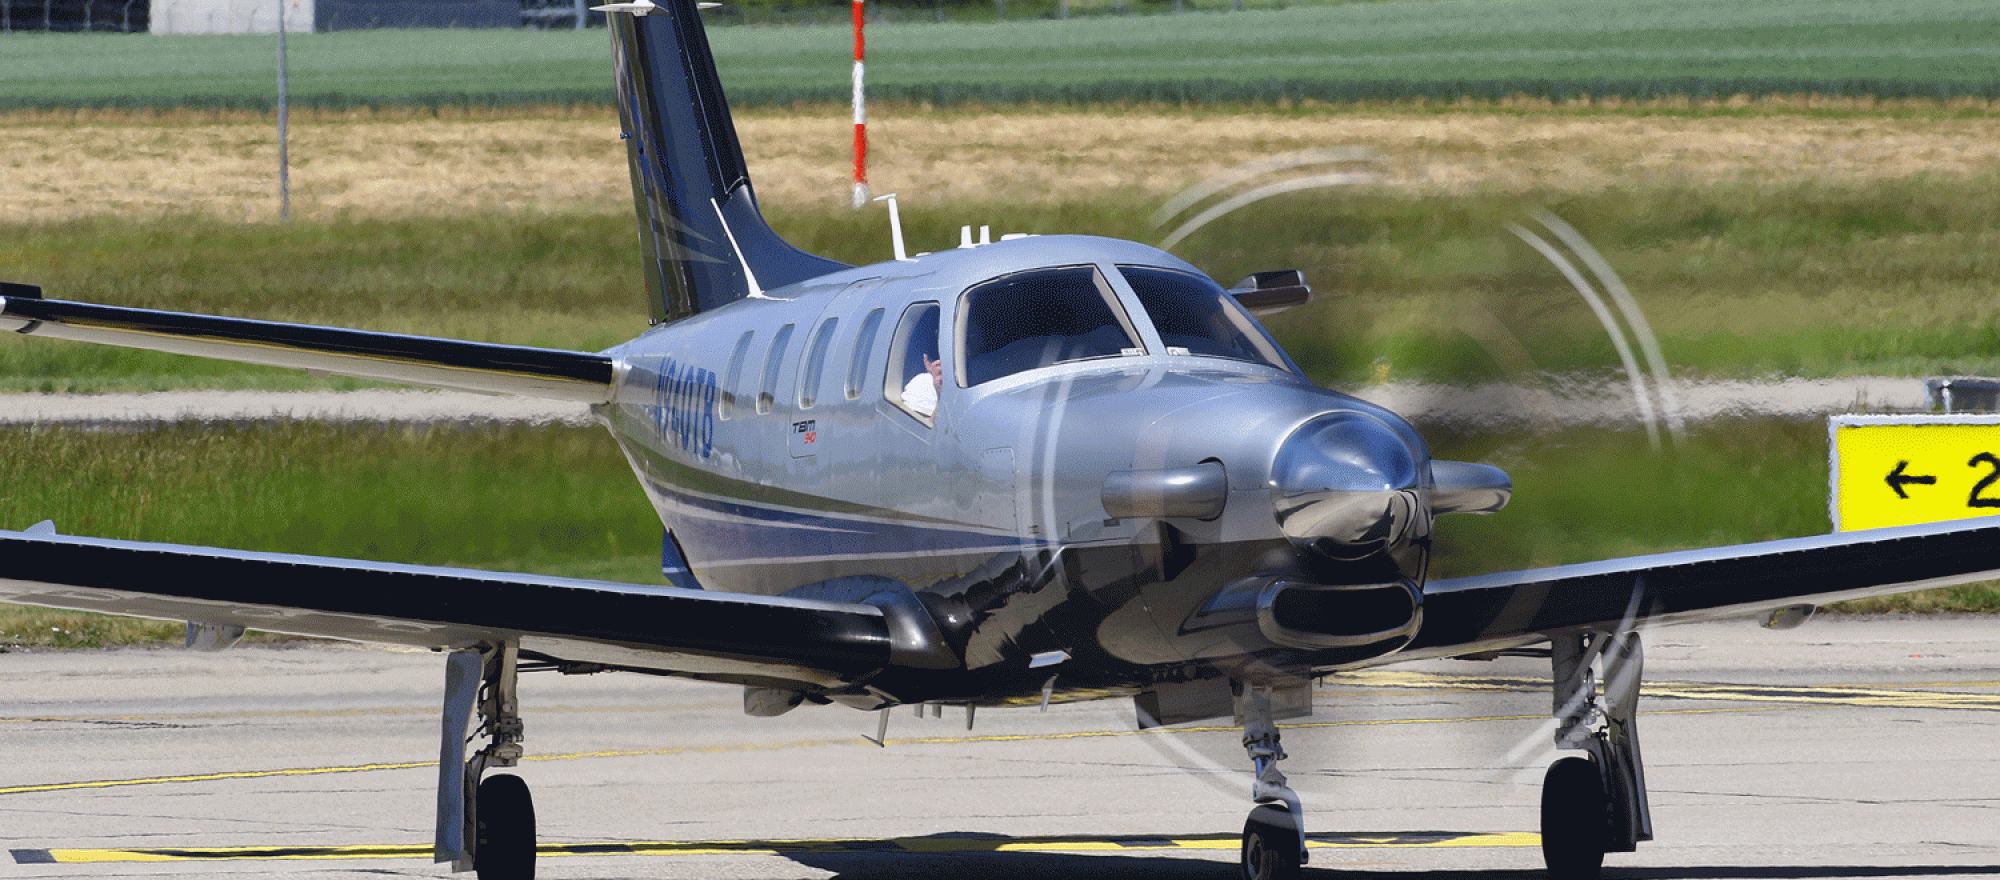 Moove is offering shares in the TBM 960.